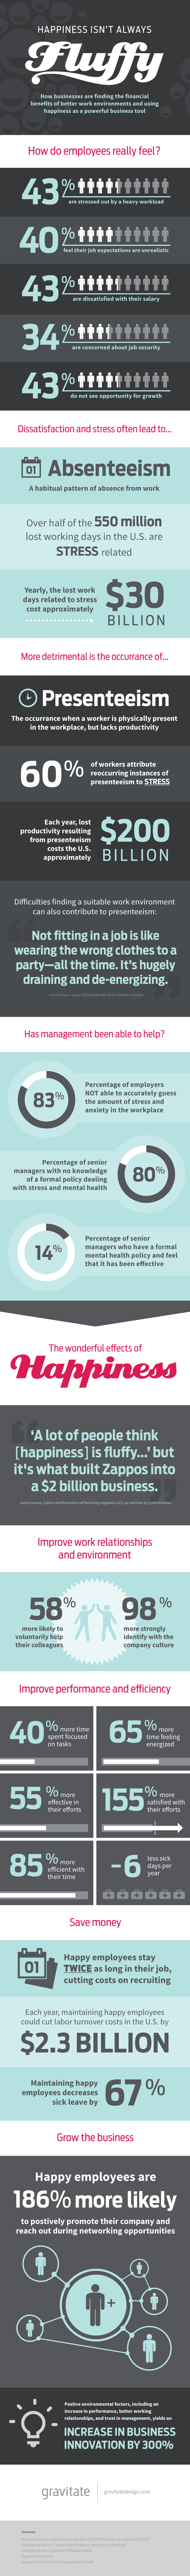 Employee Public Relations - Happiness Infographic